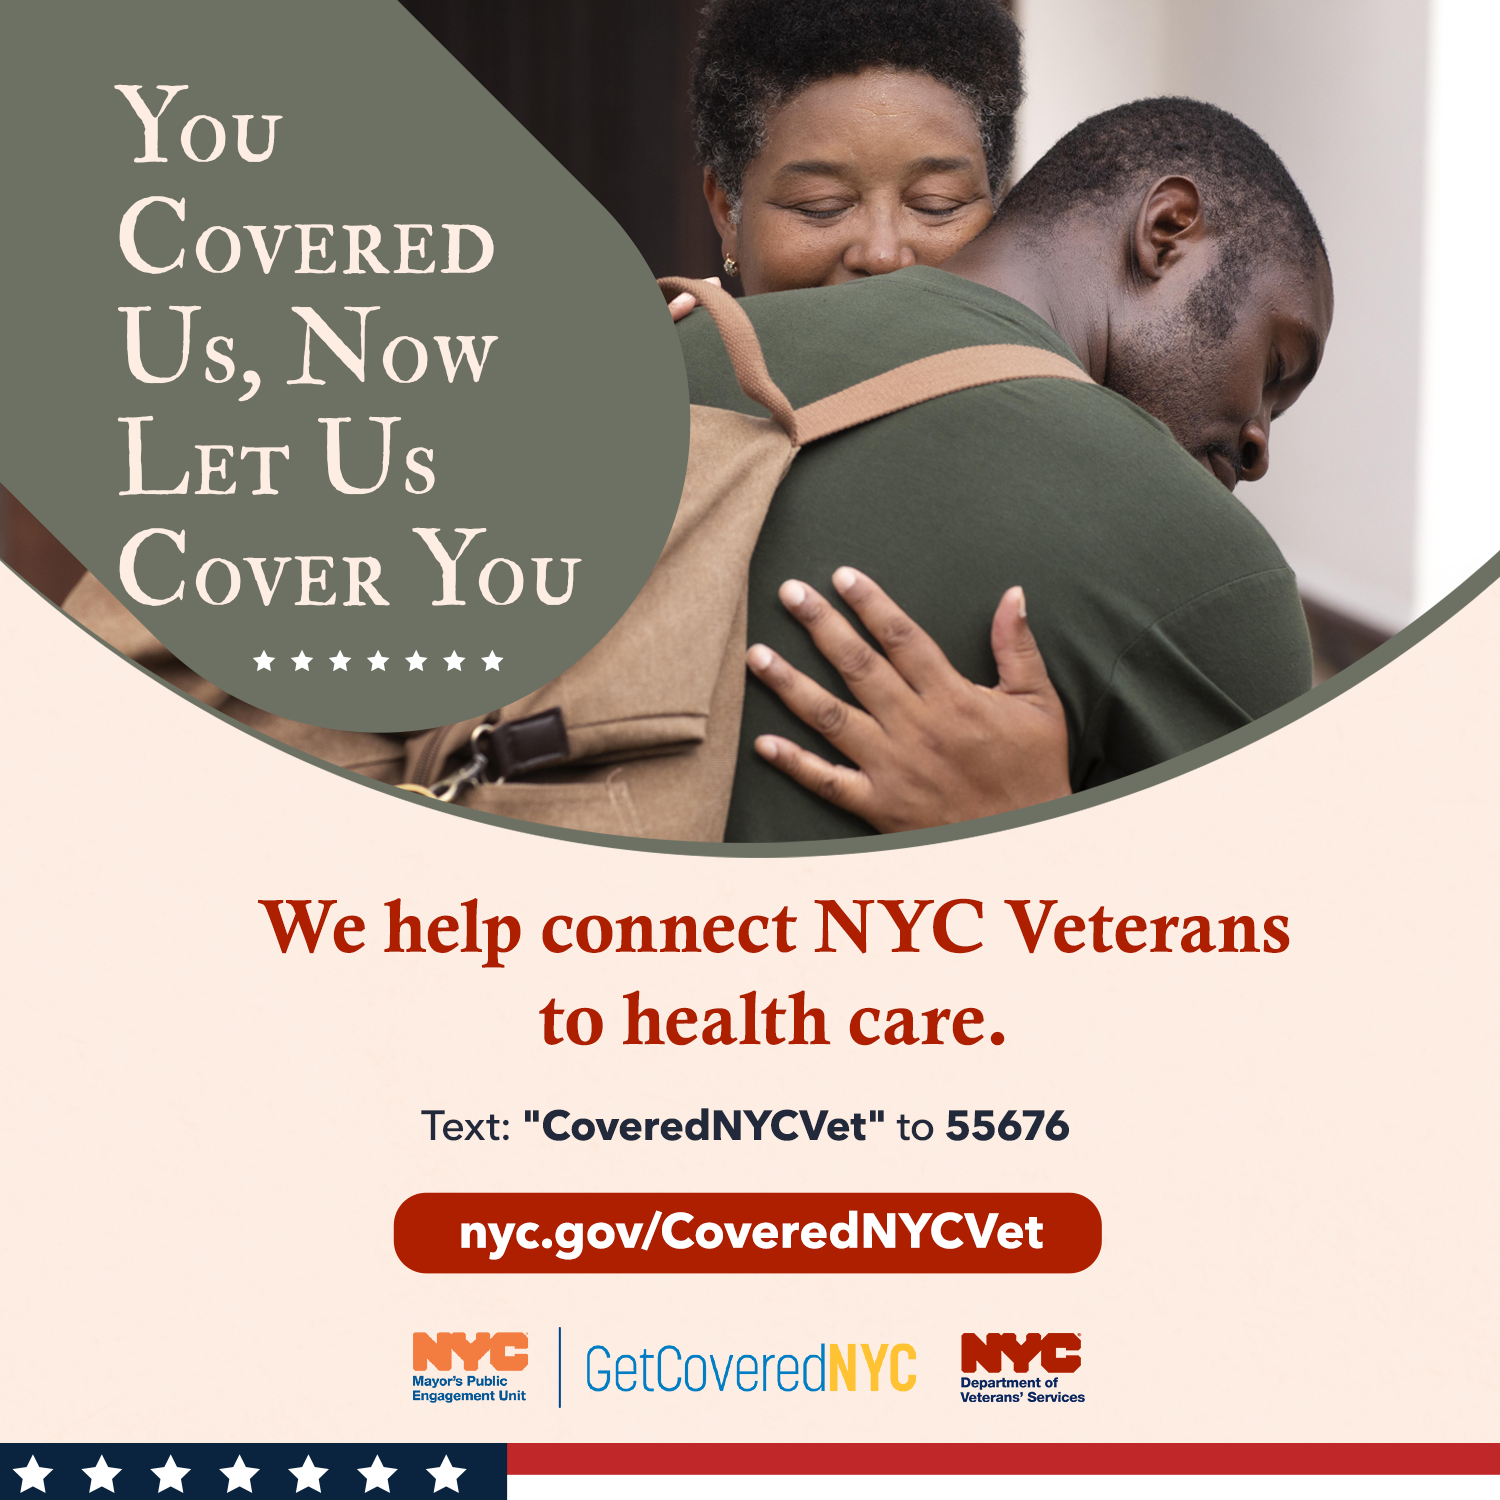 You covered us, now let us cover you. We help connect NYC Veterans to health care. Text "CoveredNYCVet" to 55676.